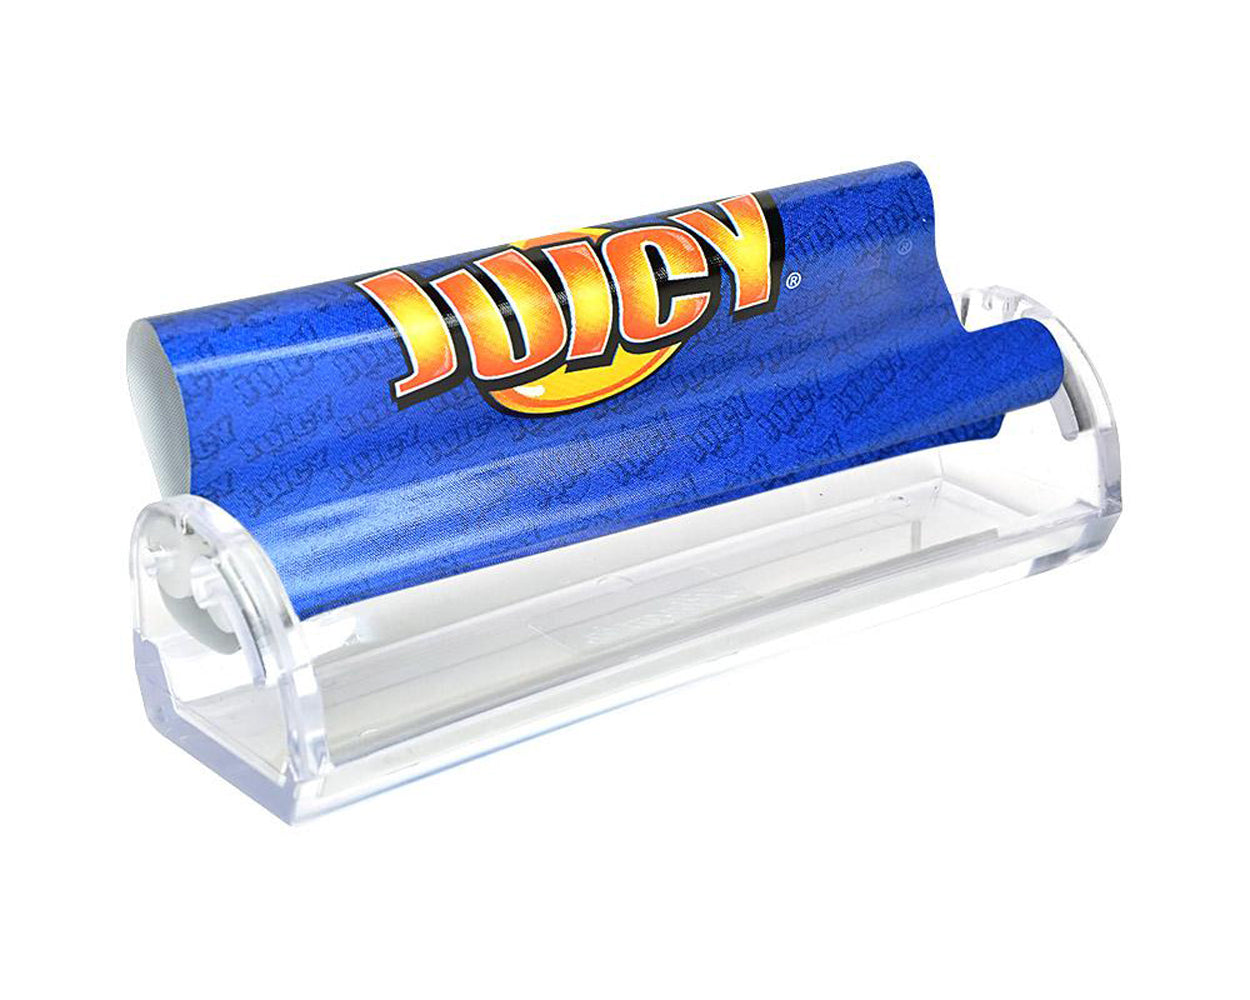 JUICY | 'Retail Display' Blunt Roller | All Sizes - Easy Rolling - 6 Count - 4